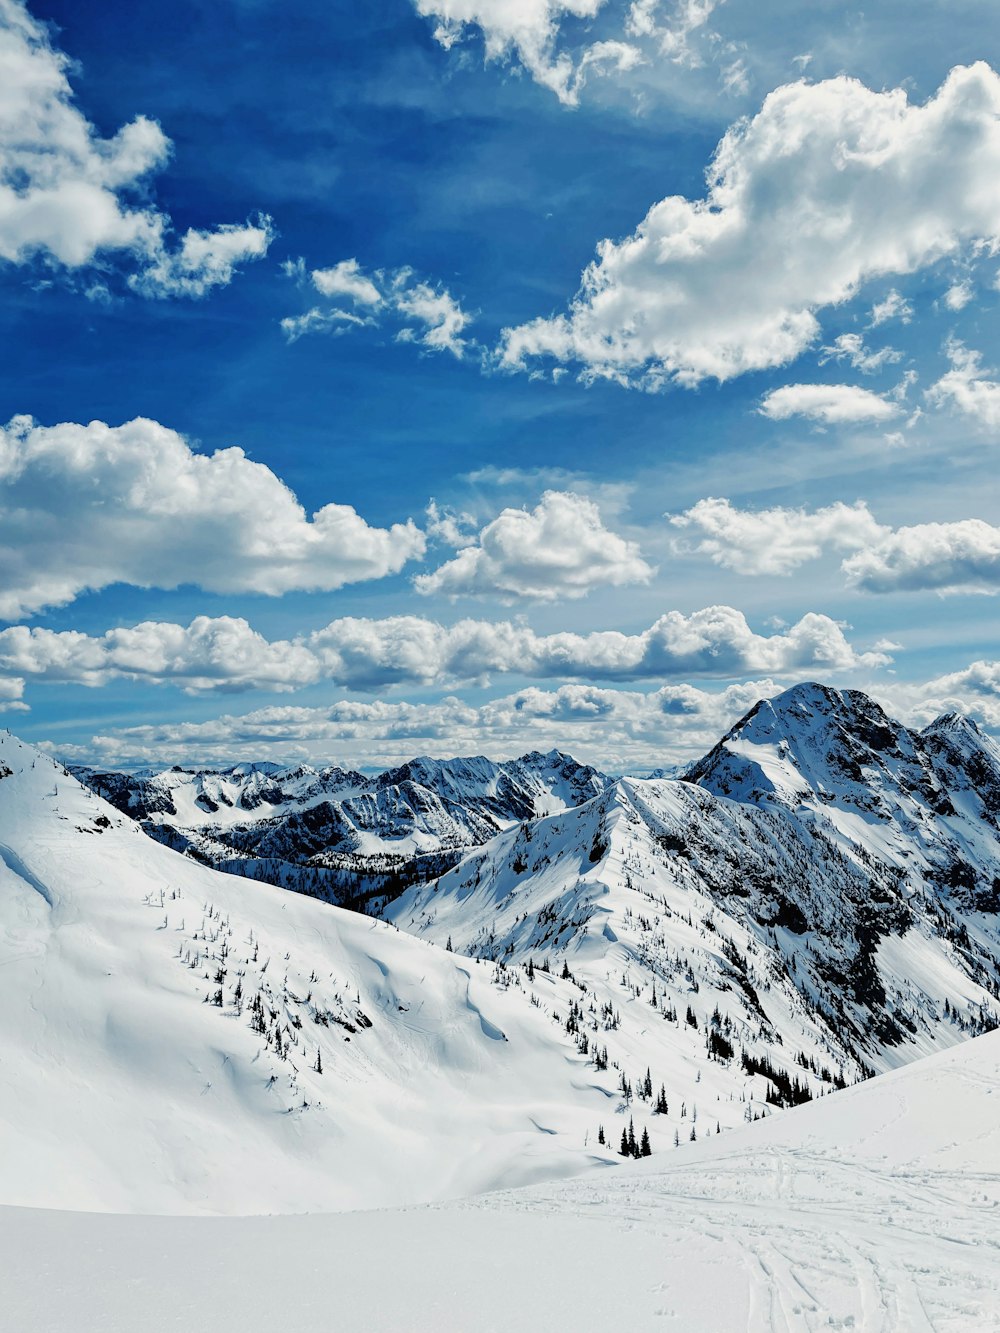 a view of a snowy mountain range under a cloudy blue sky